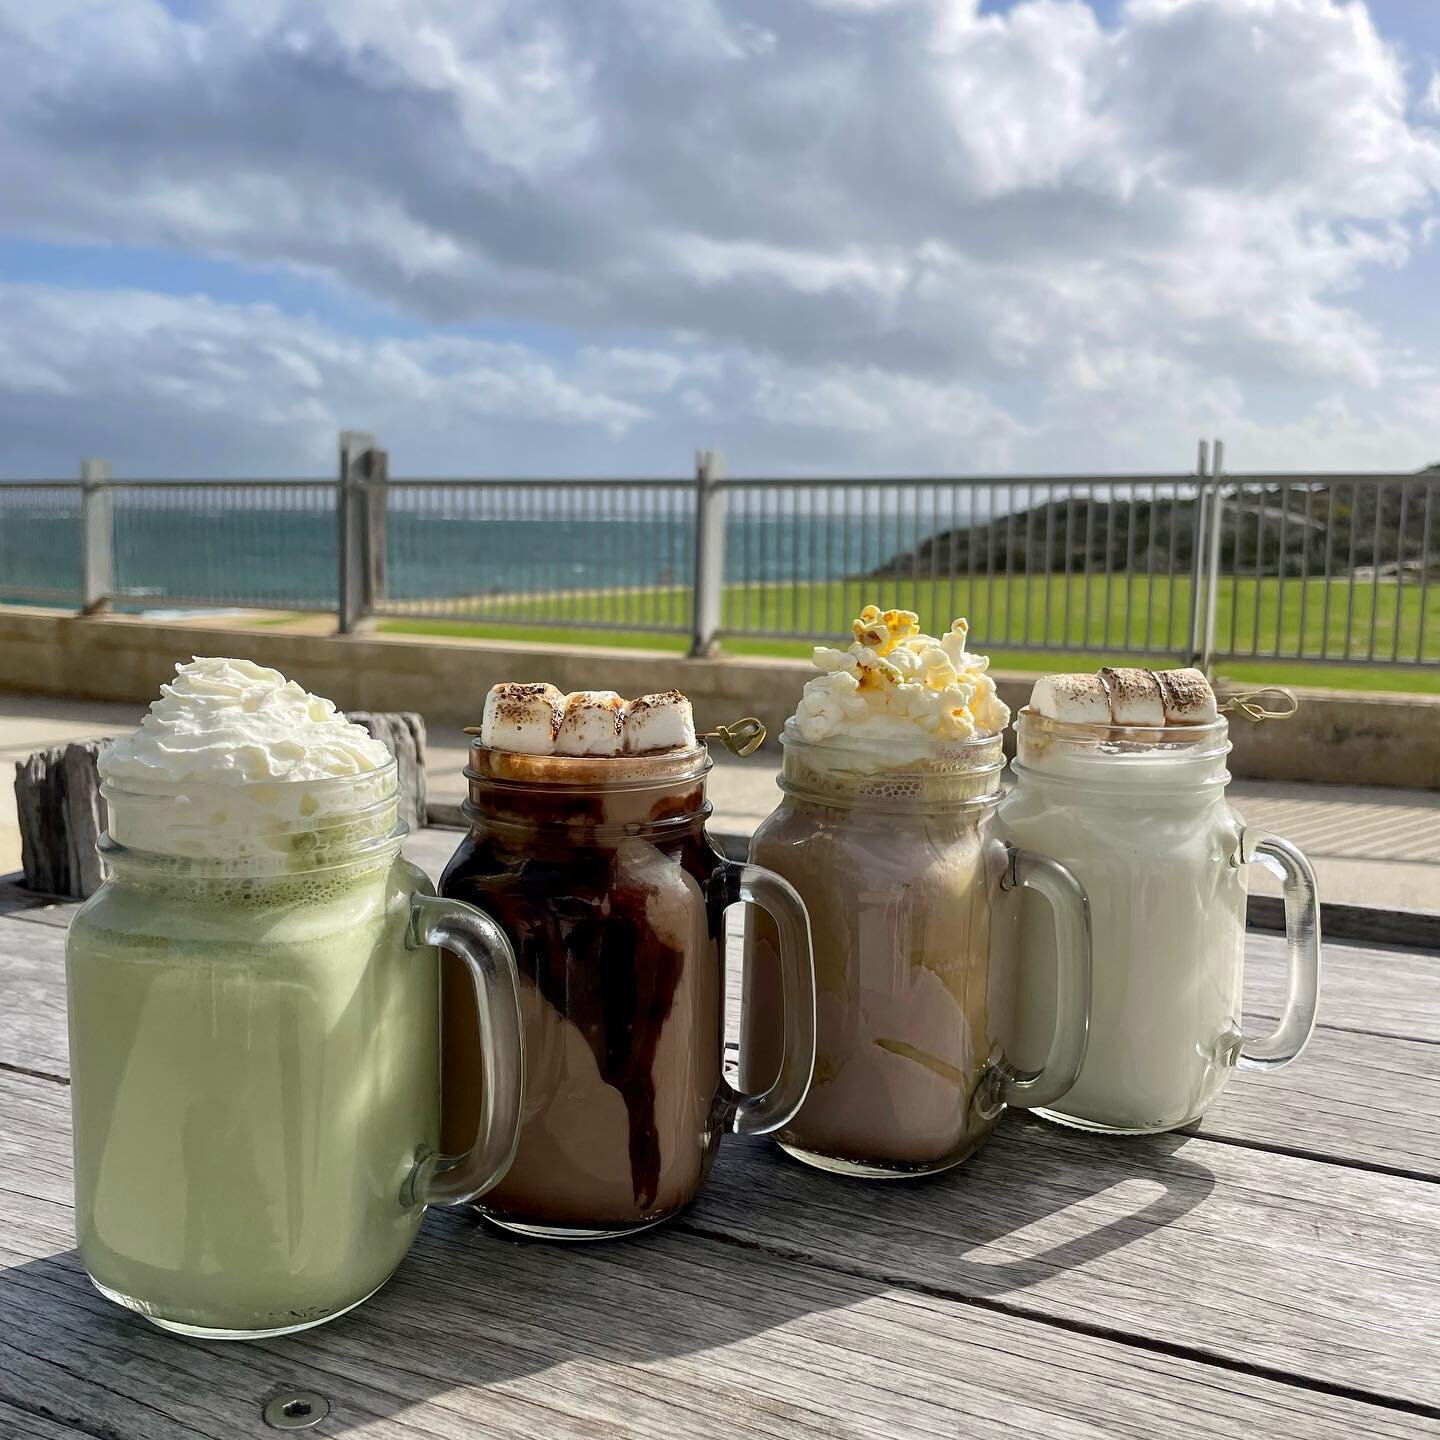 Get toasty with our BOOZY Hot Chocolates! 🔥 🍫 

🥥 Coconut Mocha with Coconut Rum
🥜 White Choc with Peanut Butter Whiskey 
🍵Matcha with Vanilla Vodka 
🍿 Salted Caramel Popcorn with Salted Carmel Vodka